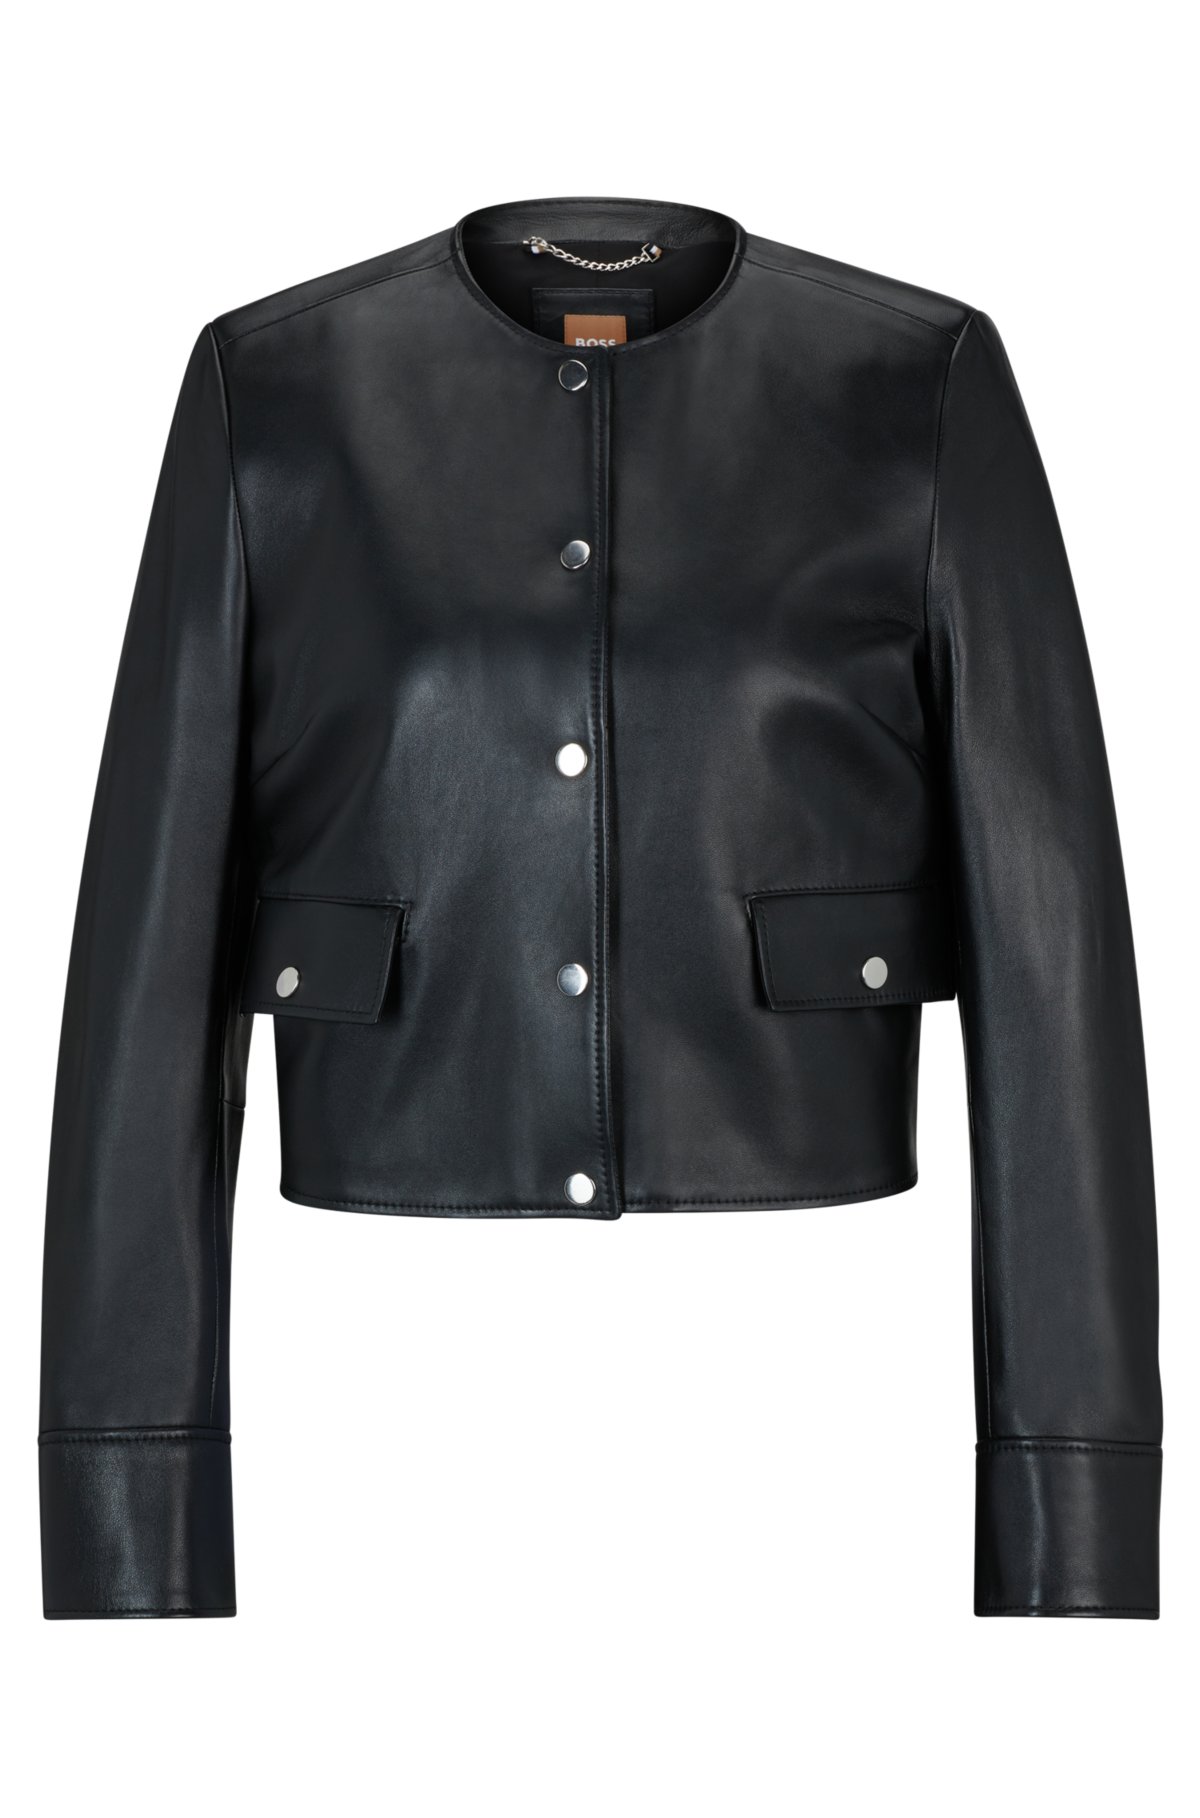 Slim-fit collarless jacket in soft leather, Black